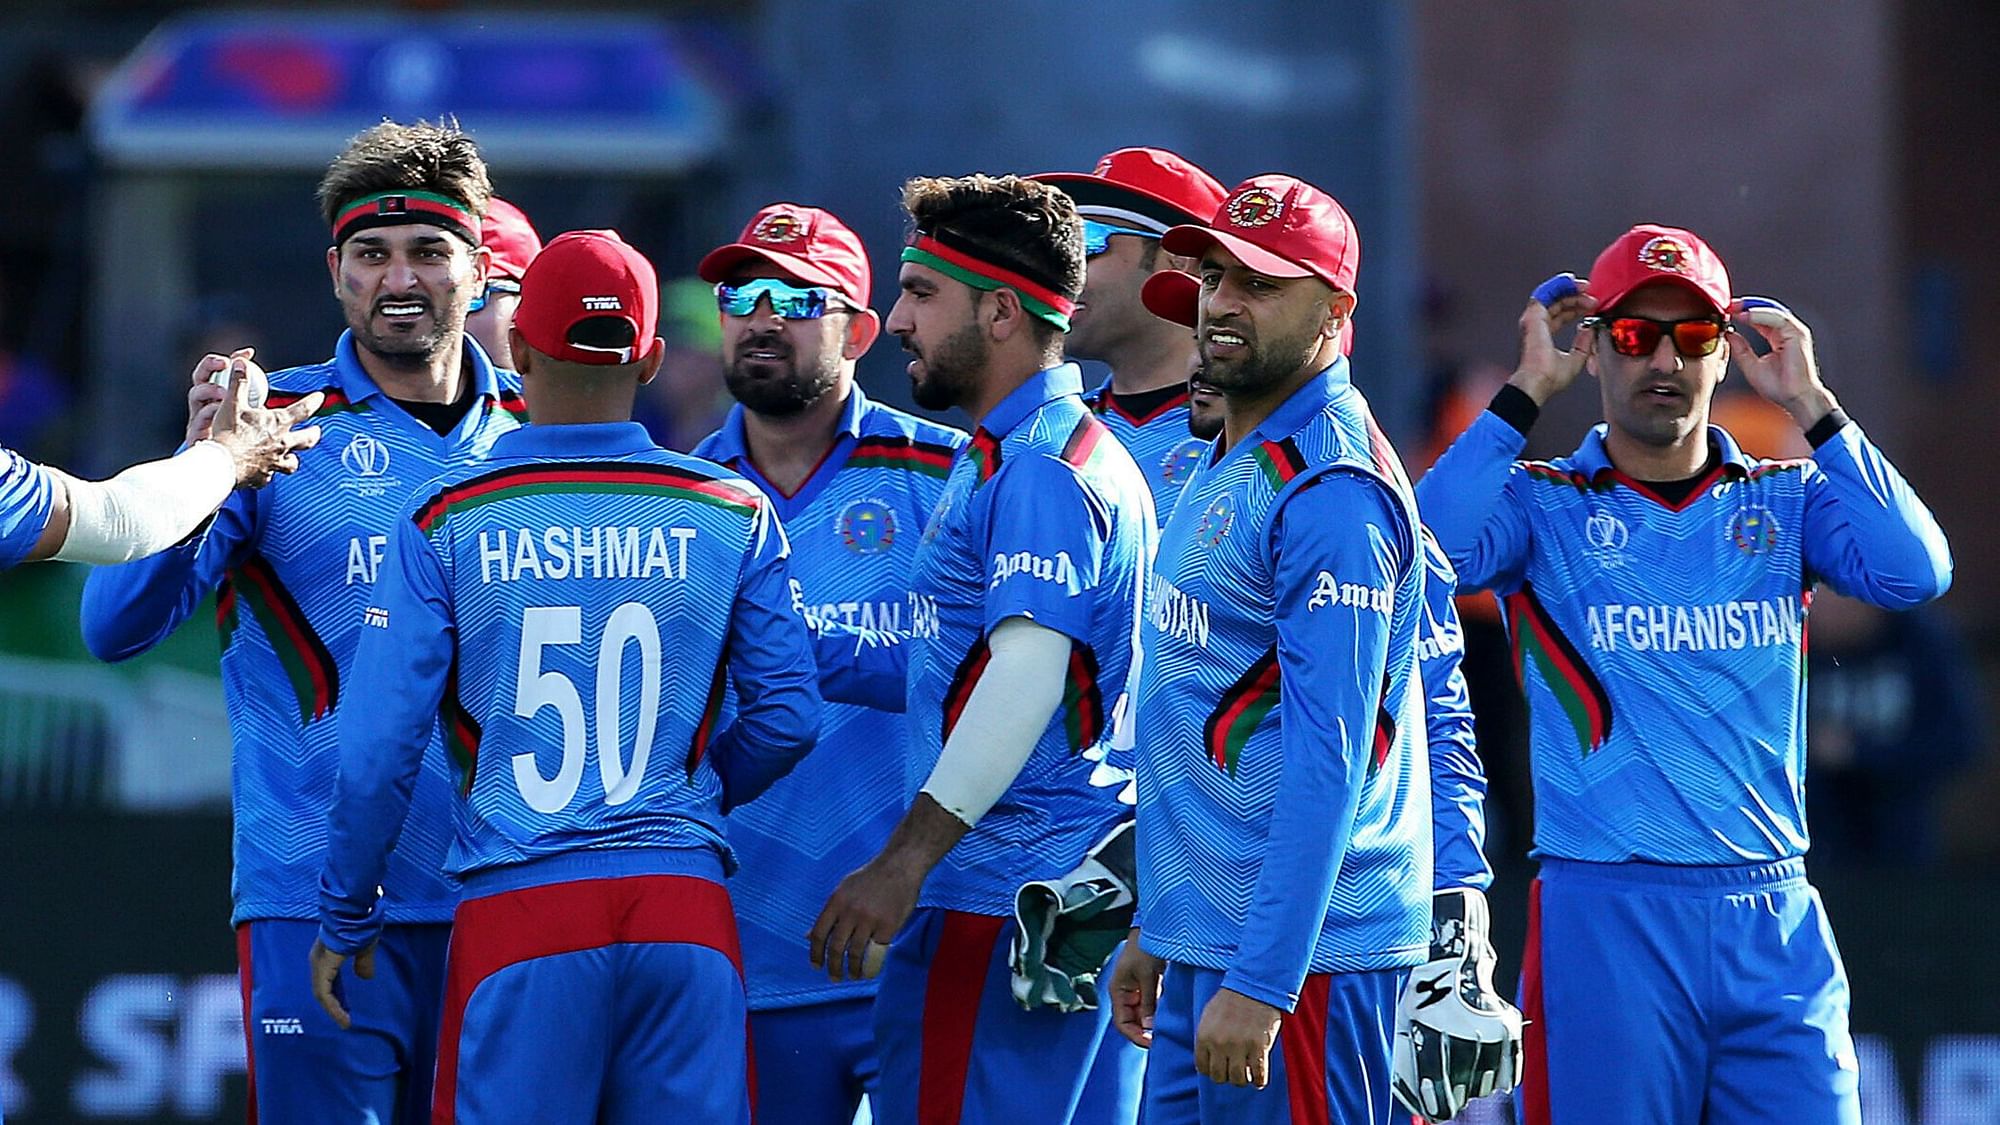 Afghanistan are at the bottom of the standings after losing all 5 of their ICC World Cup matches so far.&nbsp;